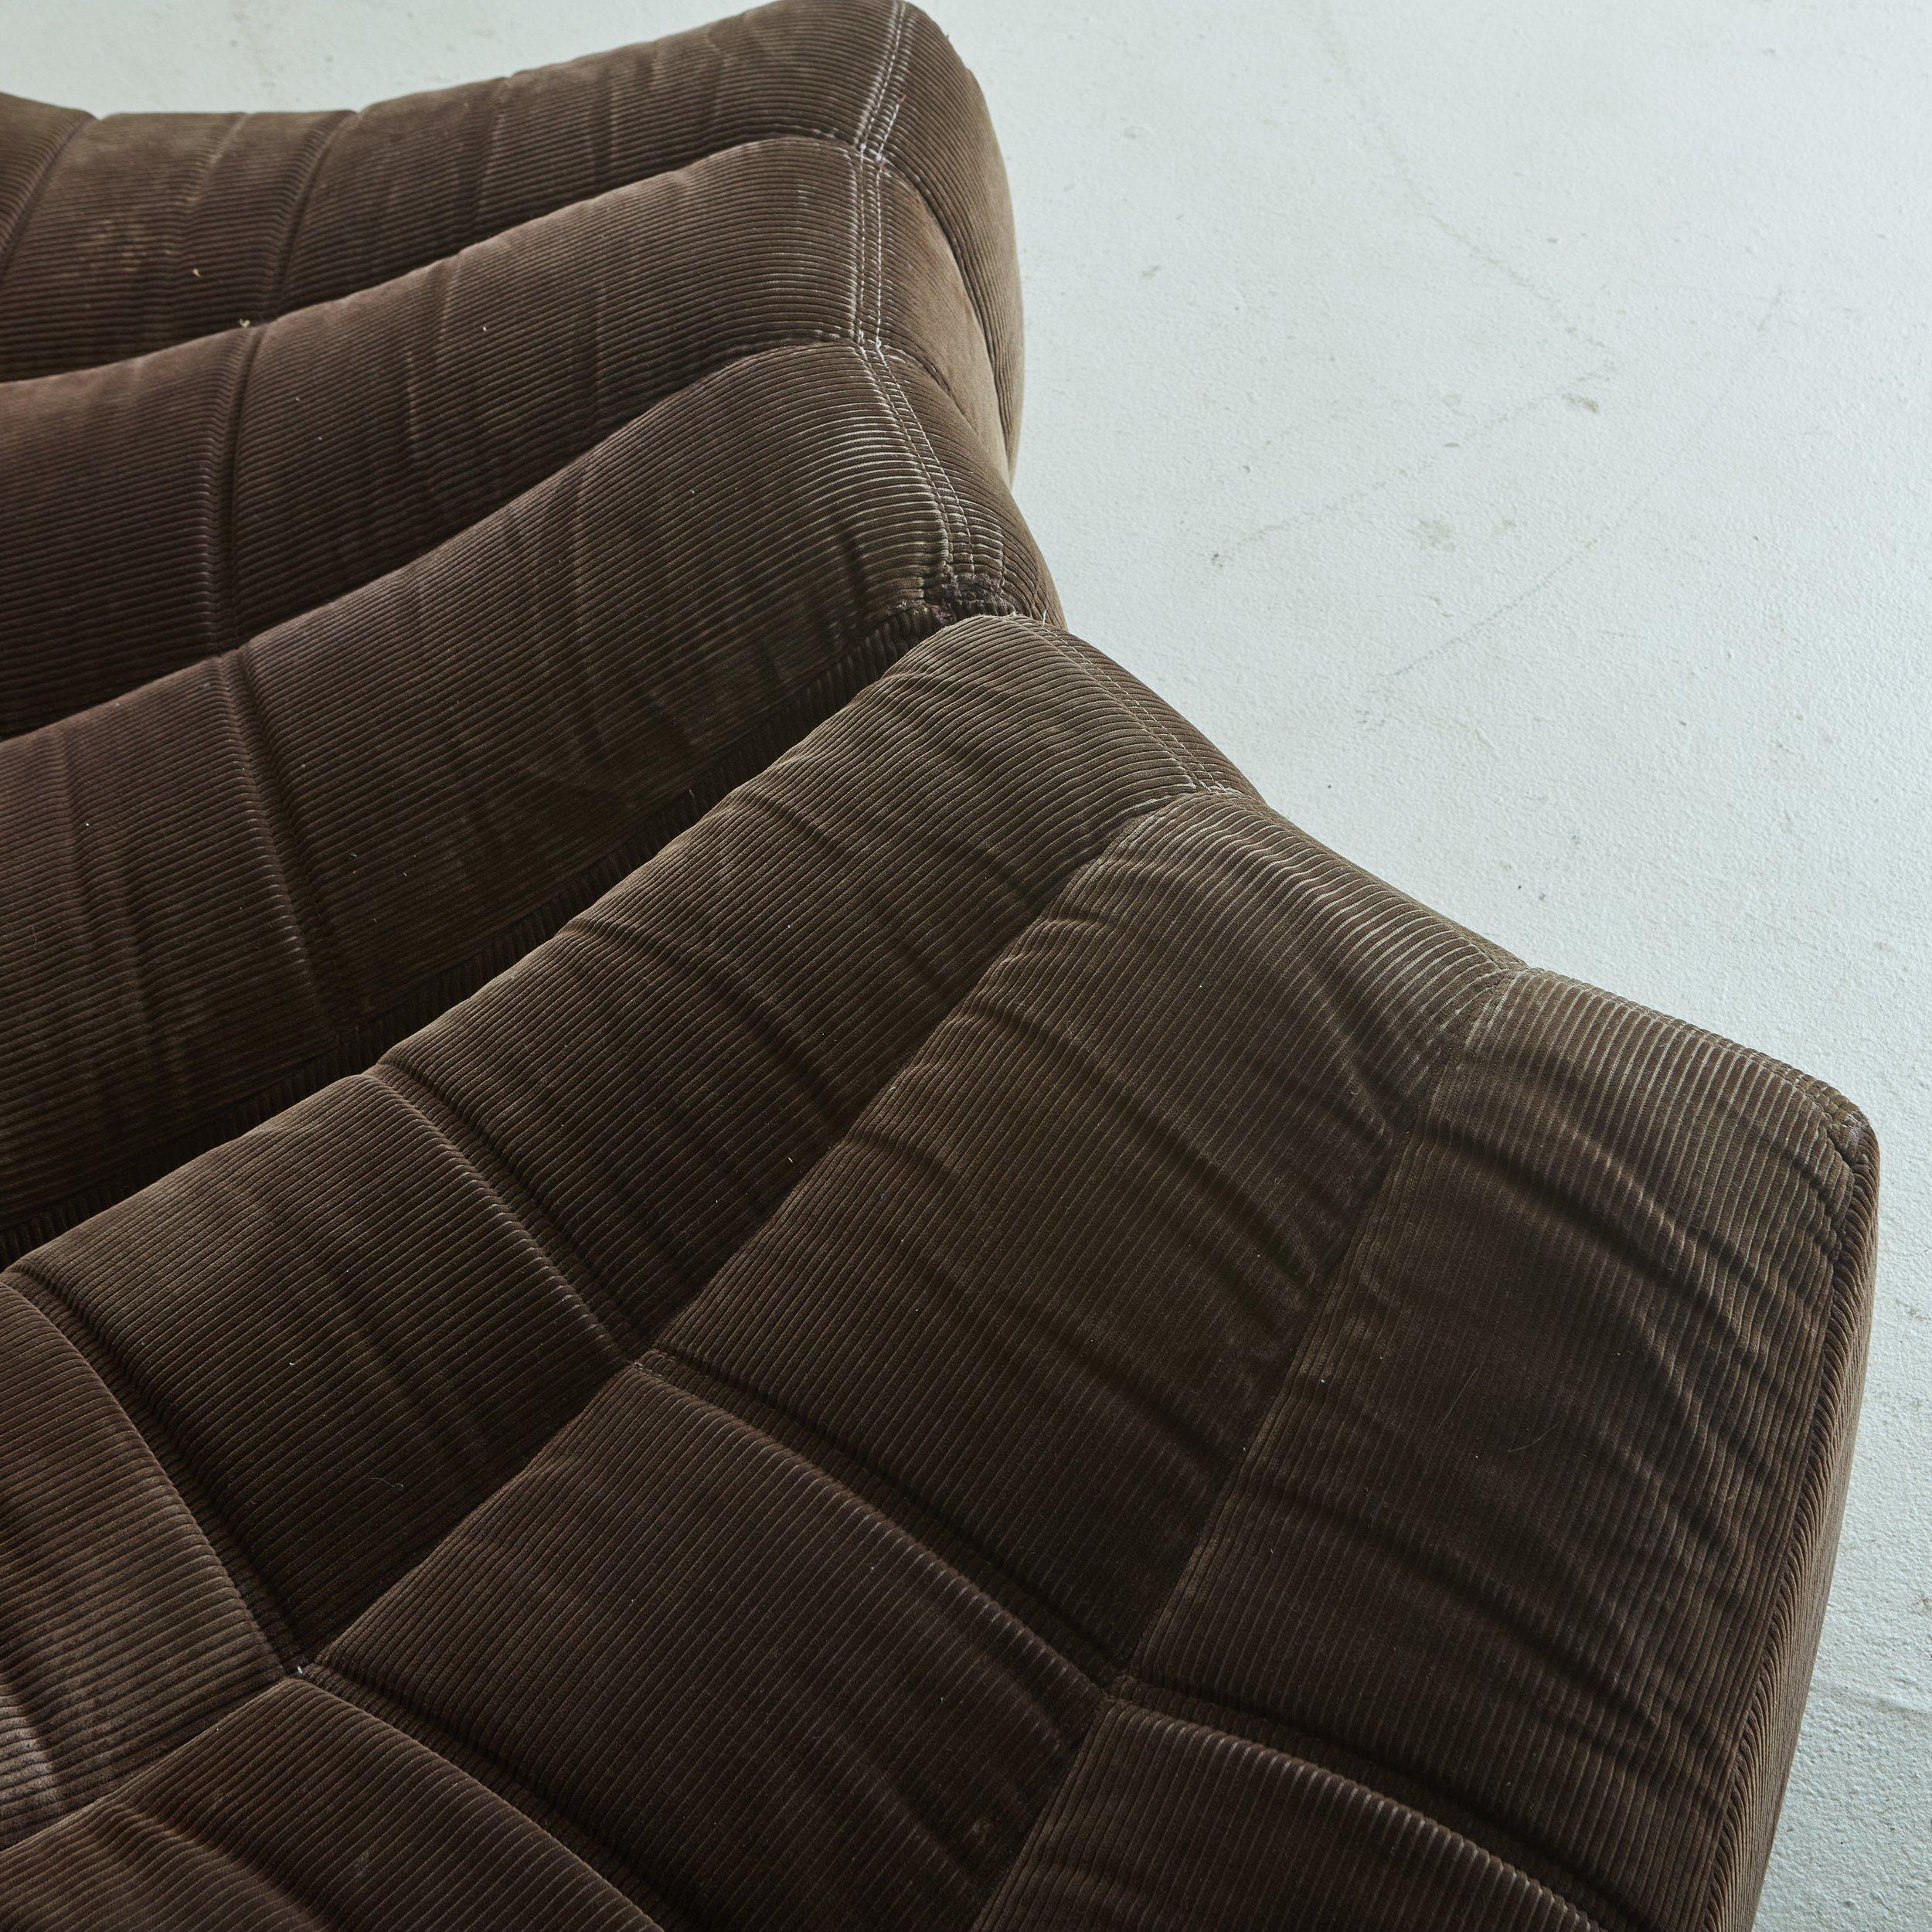 Late 20th Century 2-Piece 'Gilda' Sofa in Brown Corduroy by Michel Ducaroy for Ligne Roset, France For Sale